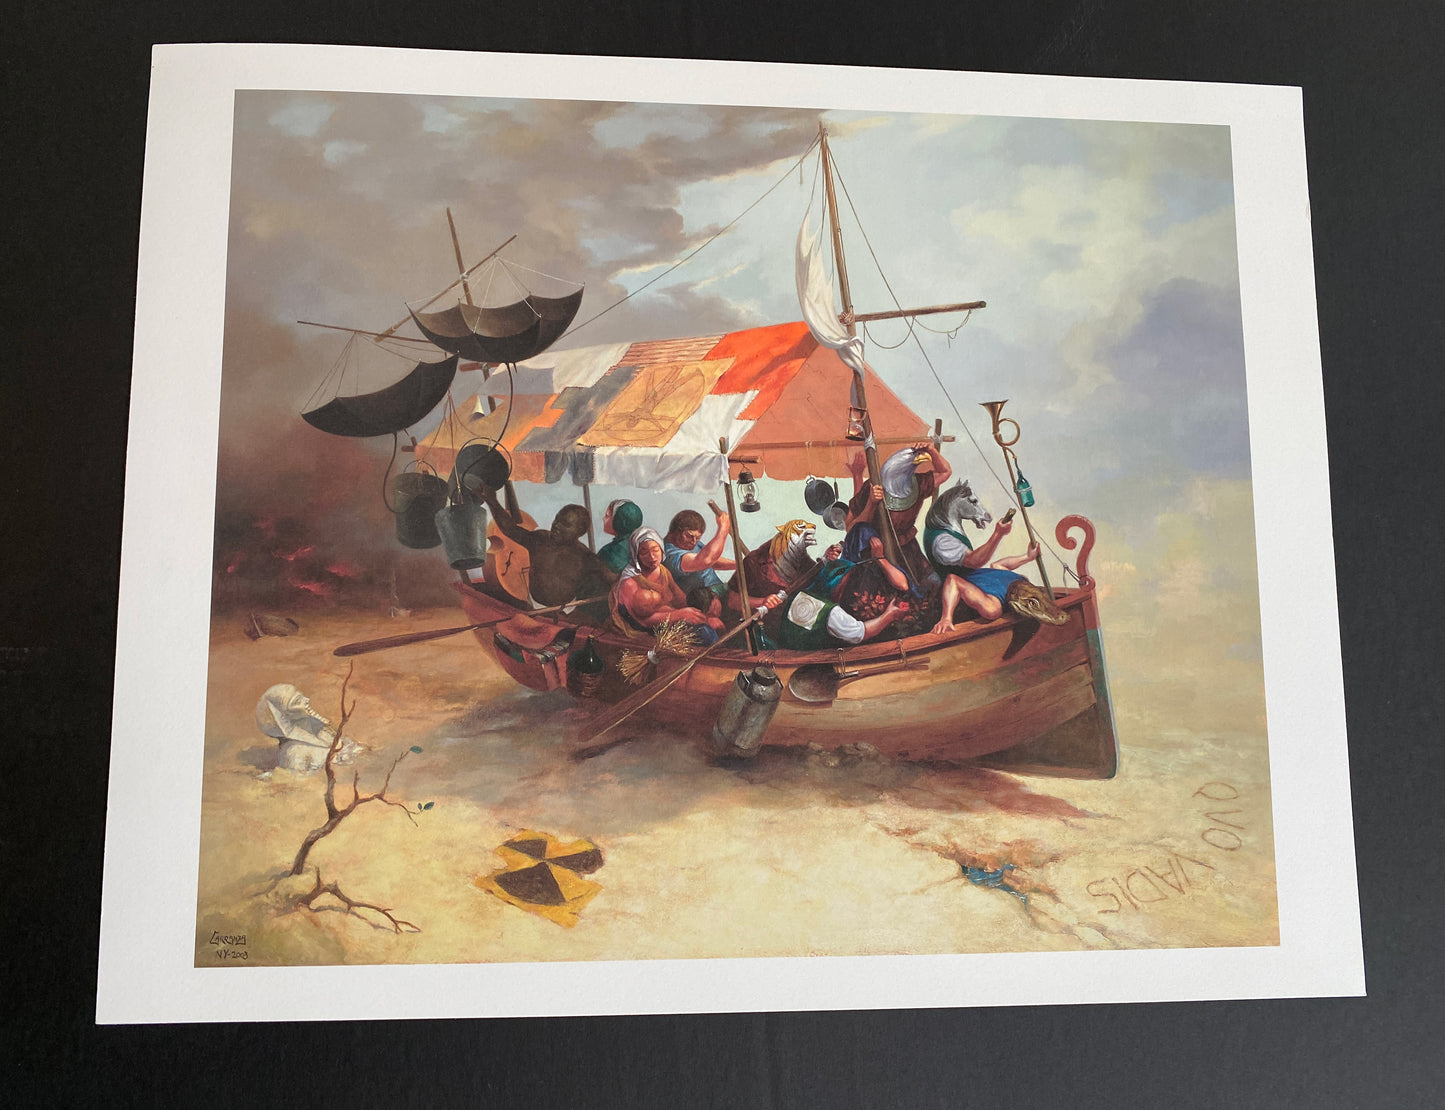 #4407 Giclee on Paper (Quo Vadis) By Daniel Carranza .